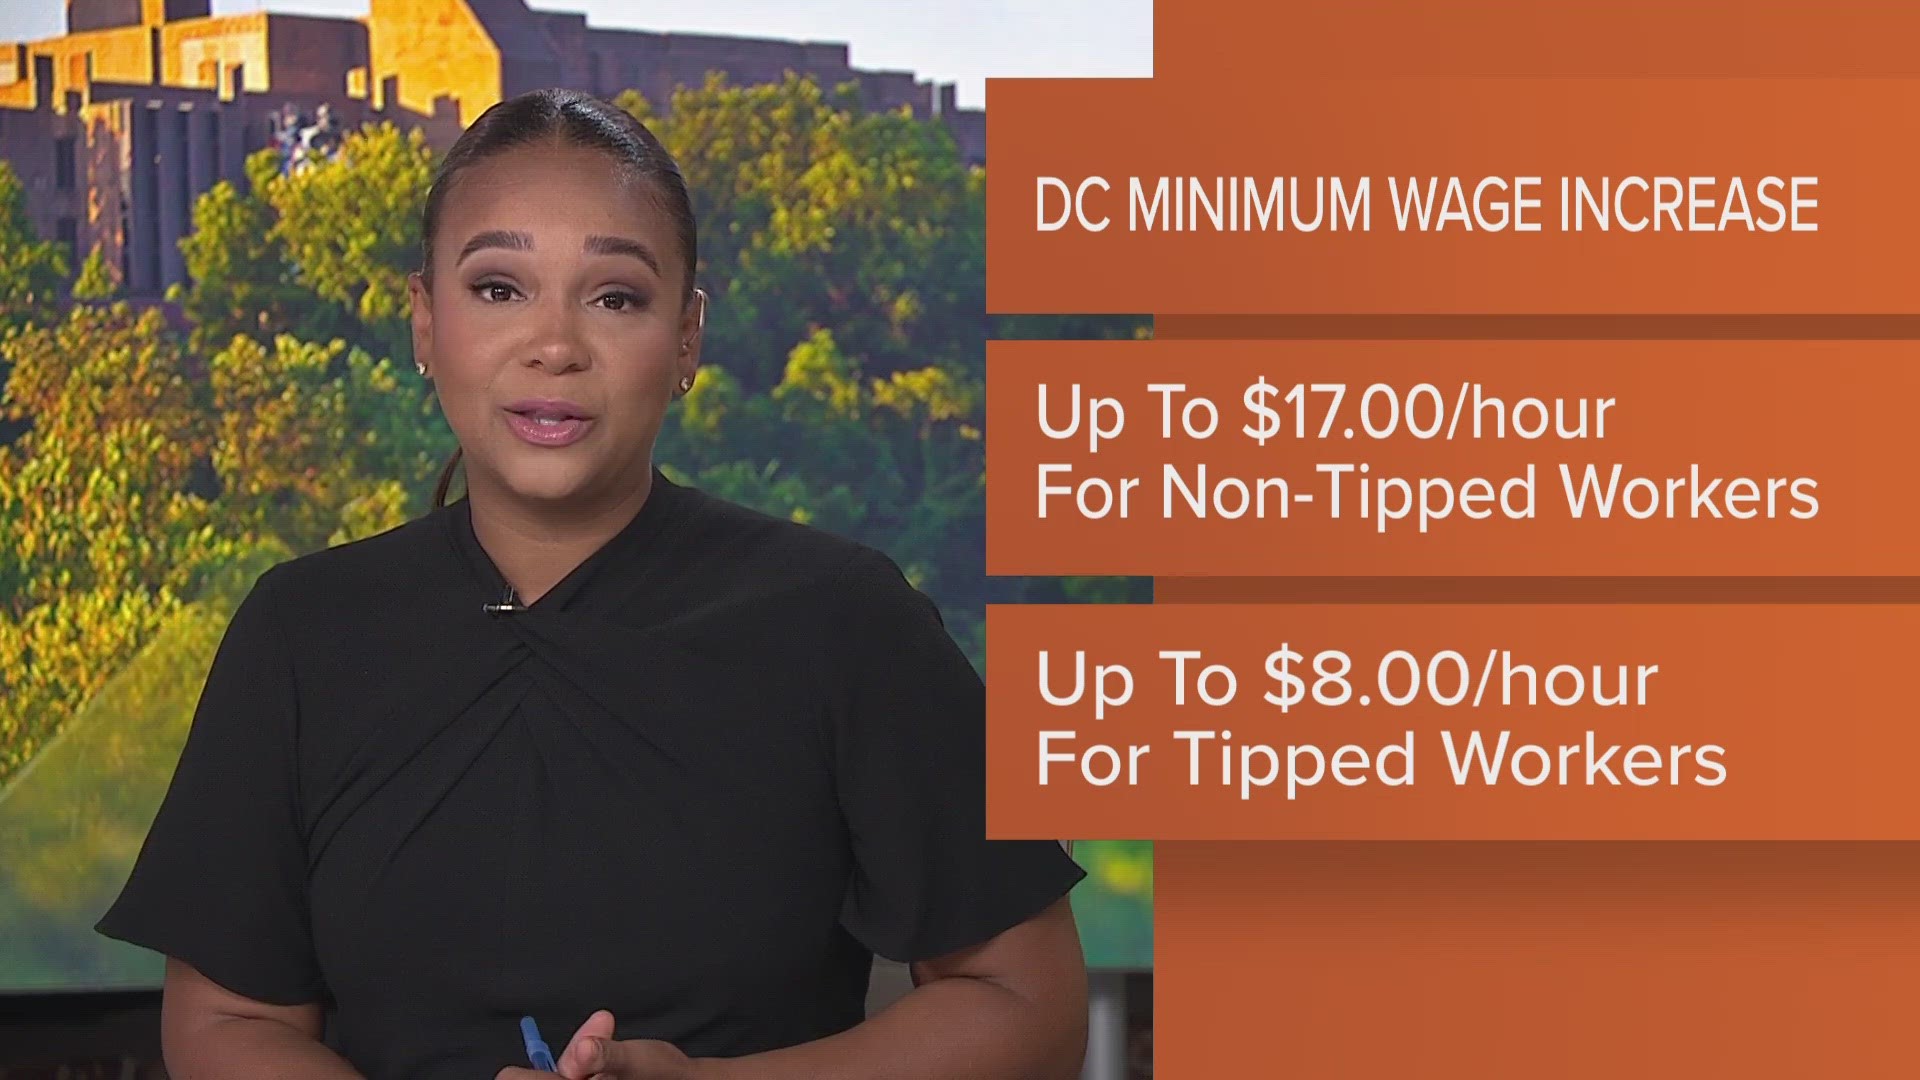 DC is increasing its minimum wage to $17/hour for untipped employees and $8/hour for tipped employees.